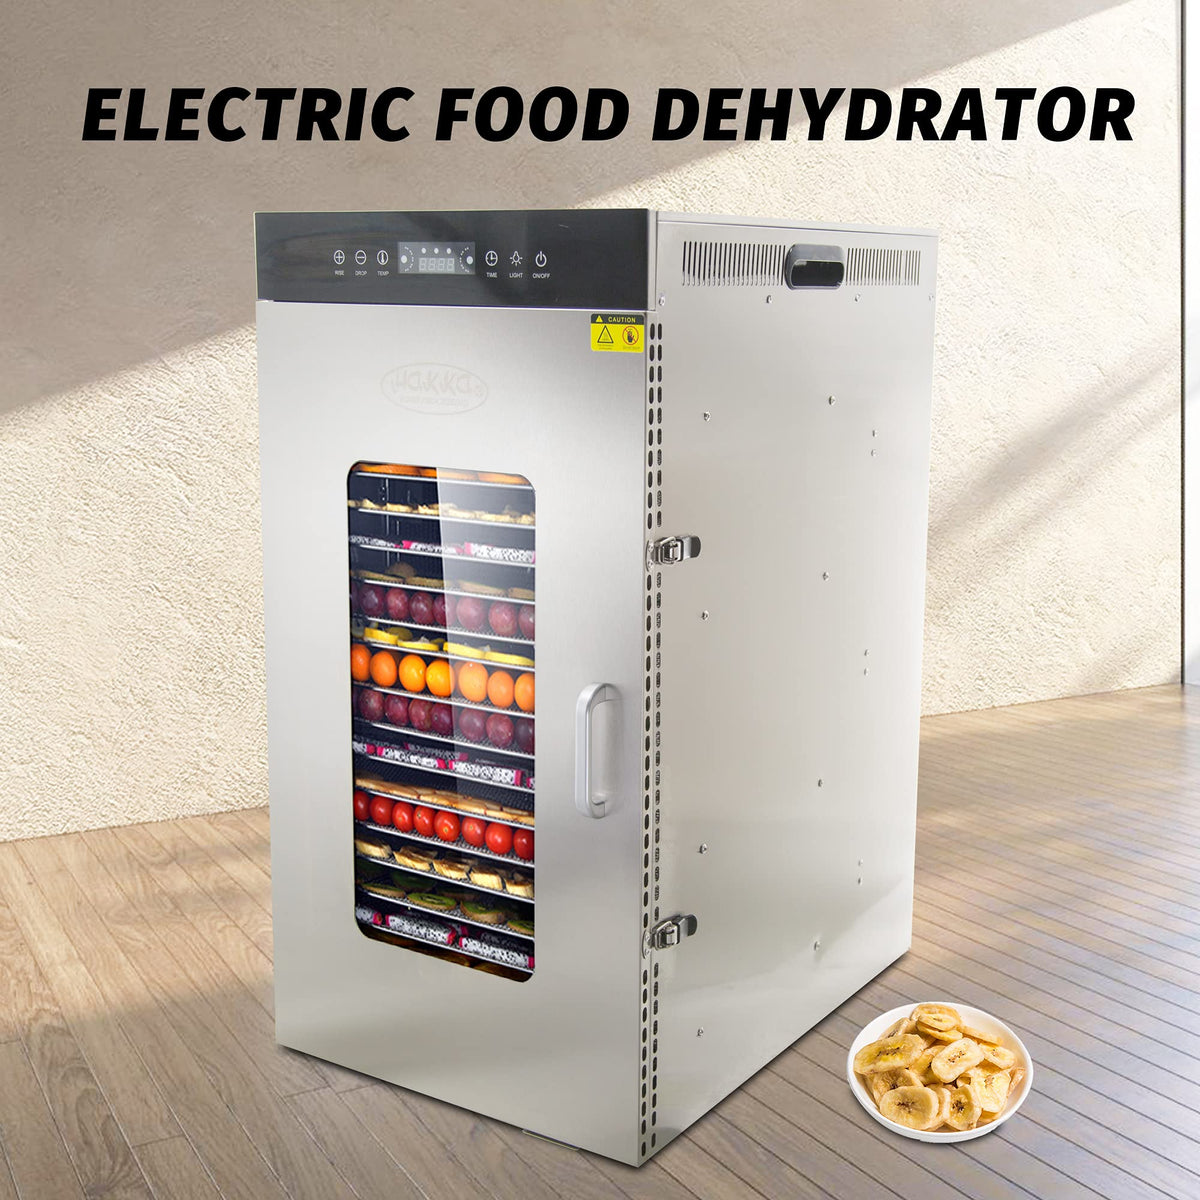 Hakka Commercial Food Dehydrator for Jerky, 20 Stainless Steel Trays Food Dryer Food-Dehydrator Machine with Adjustable Timer & 194ºF Temperature Control for Fruit/Meat/Treats/Herbs/Vegetables, 1500W